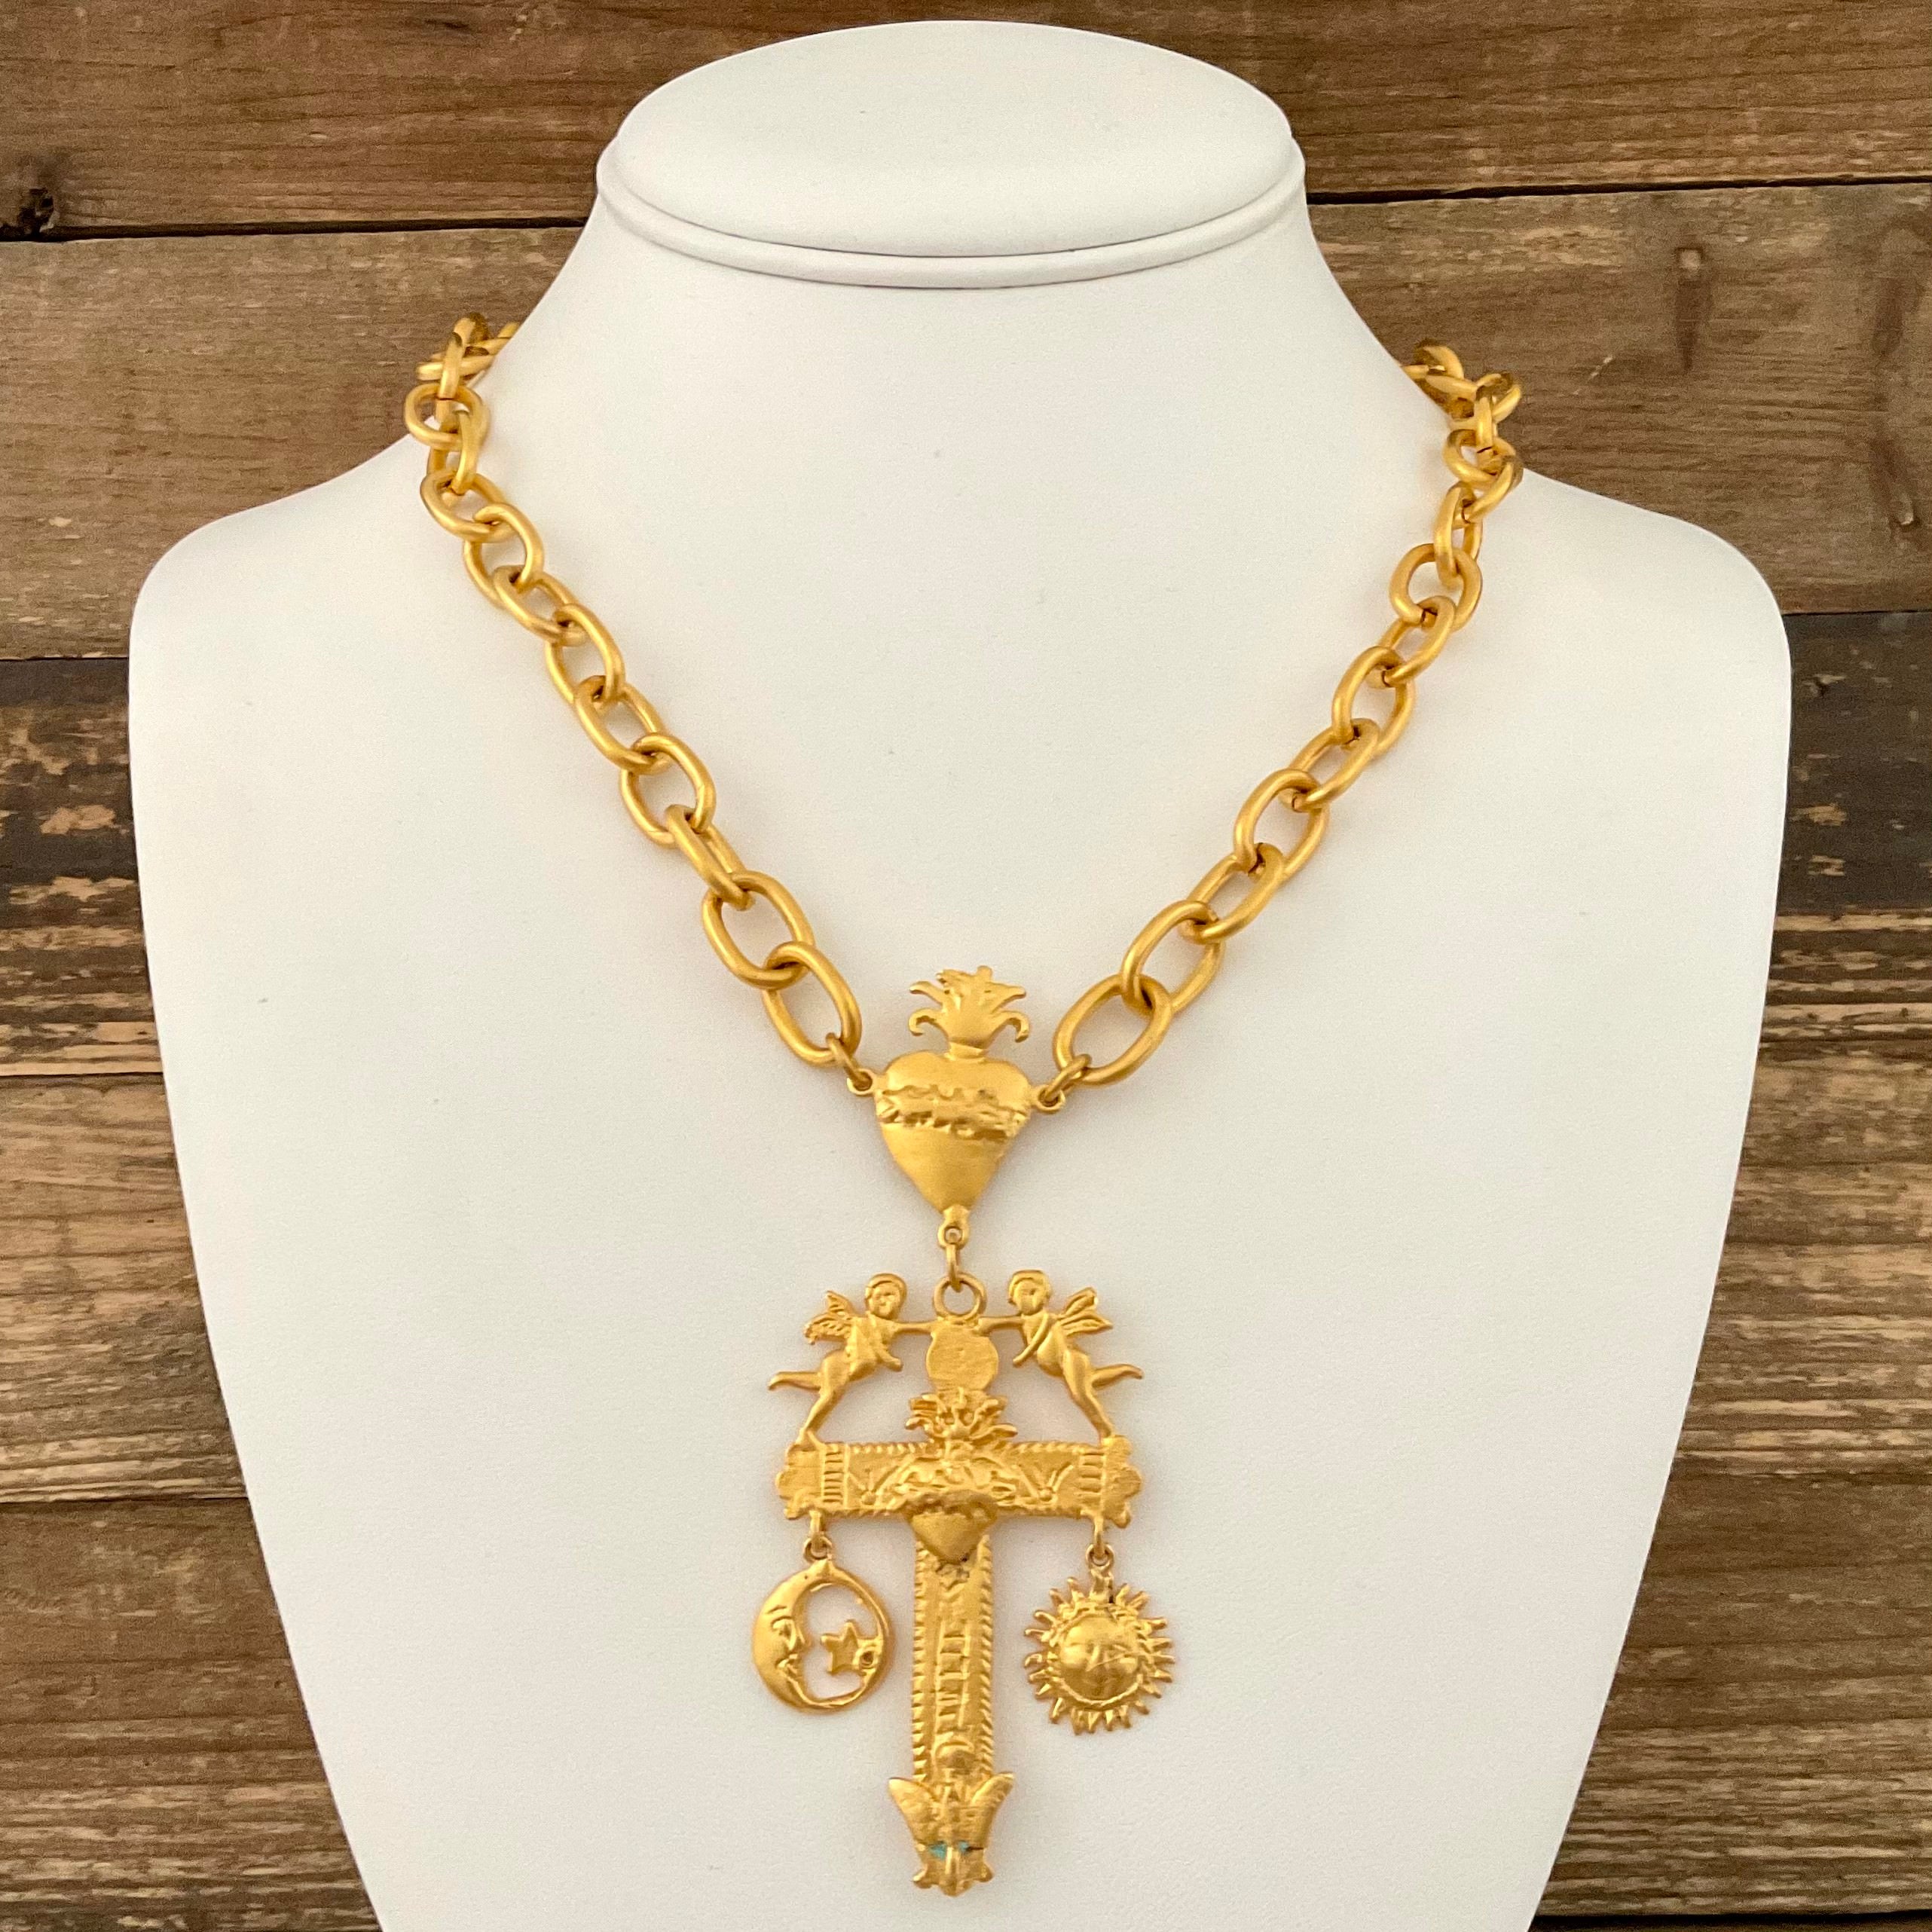 Vintage Gold Plated Chain with Cross Reproduction Pendant 18